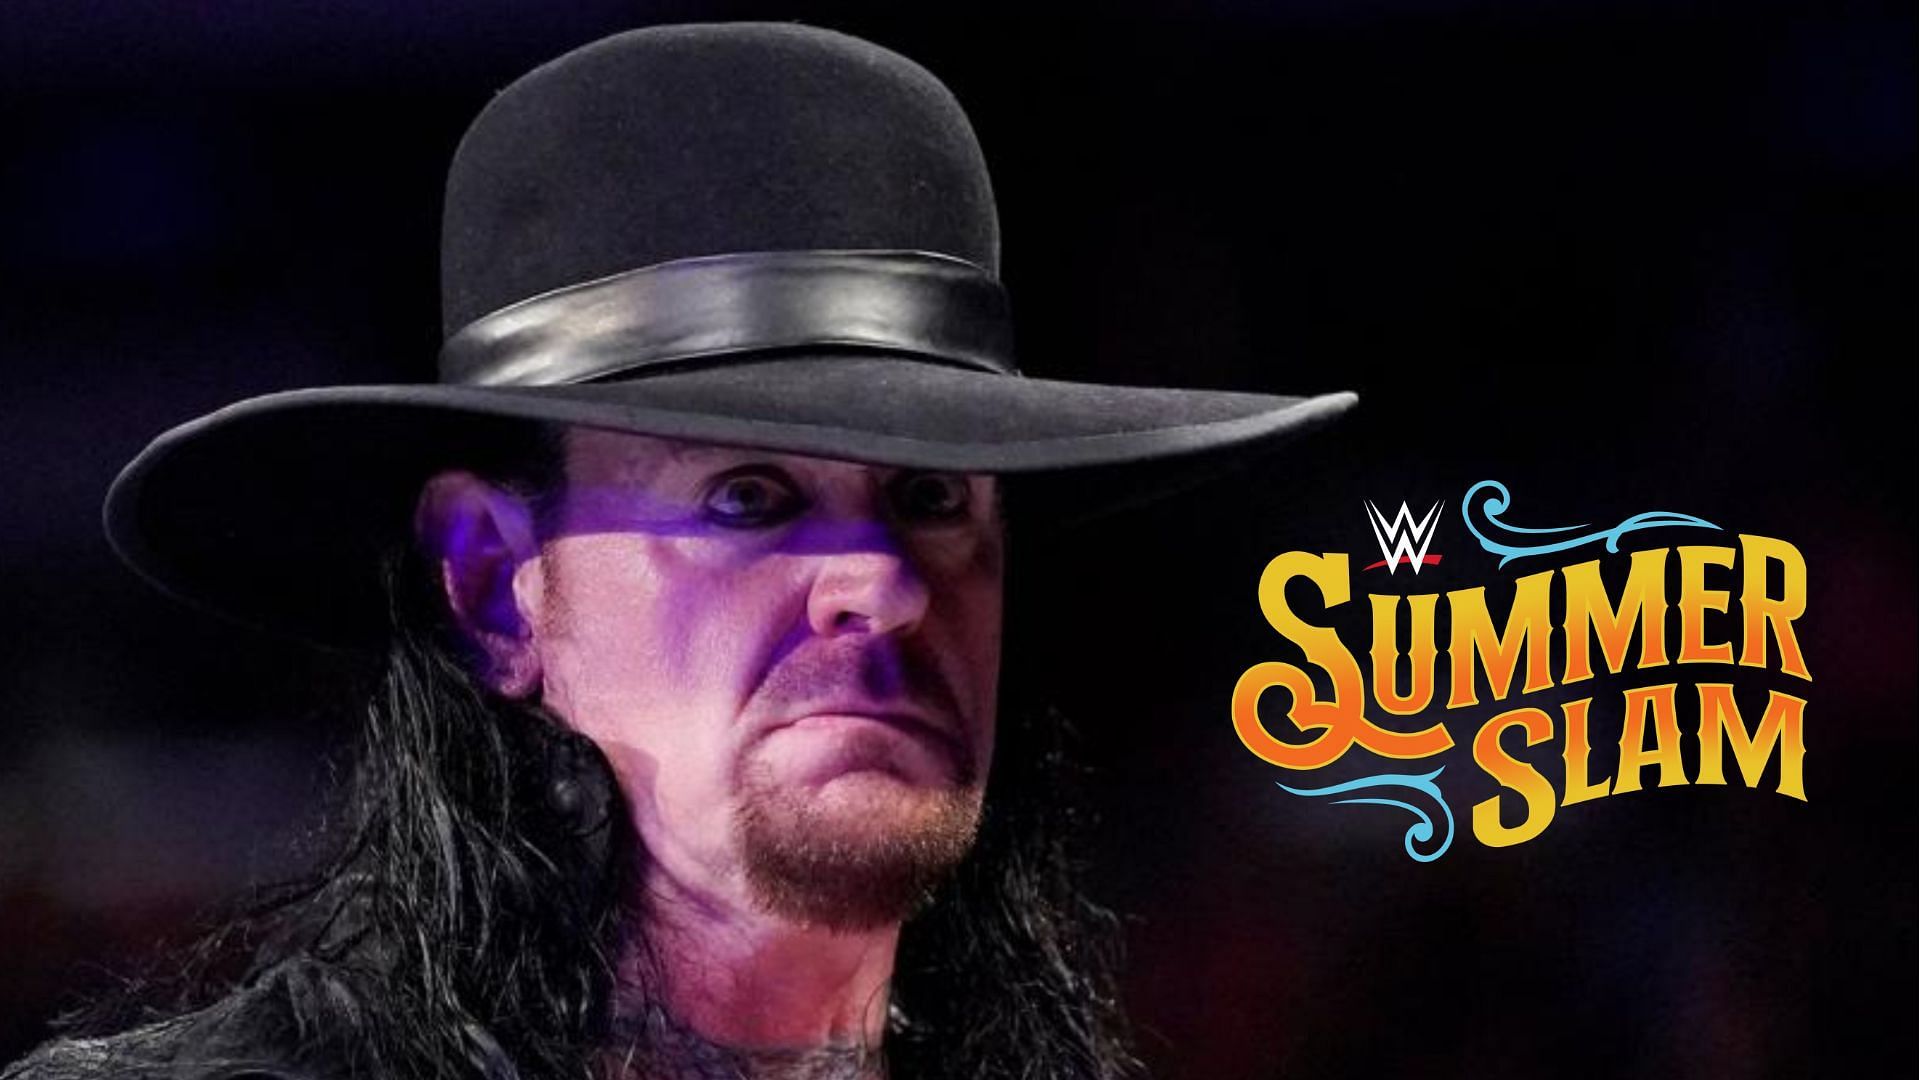 Could The Phenom show up tonight at SummerSlam?